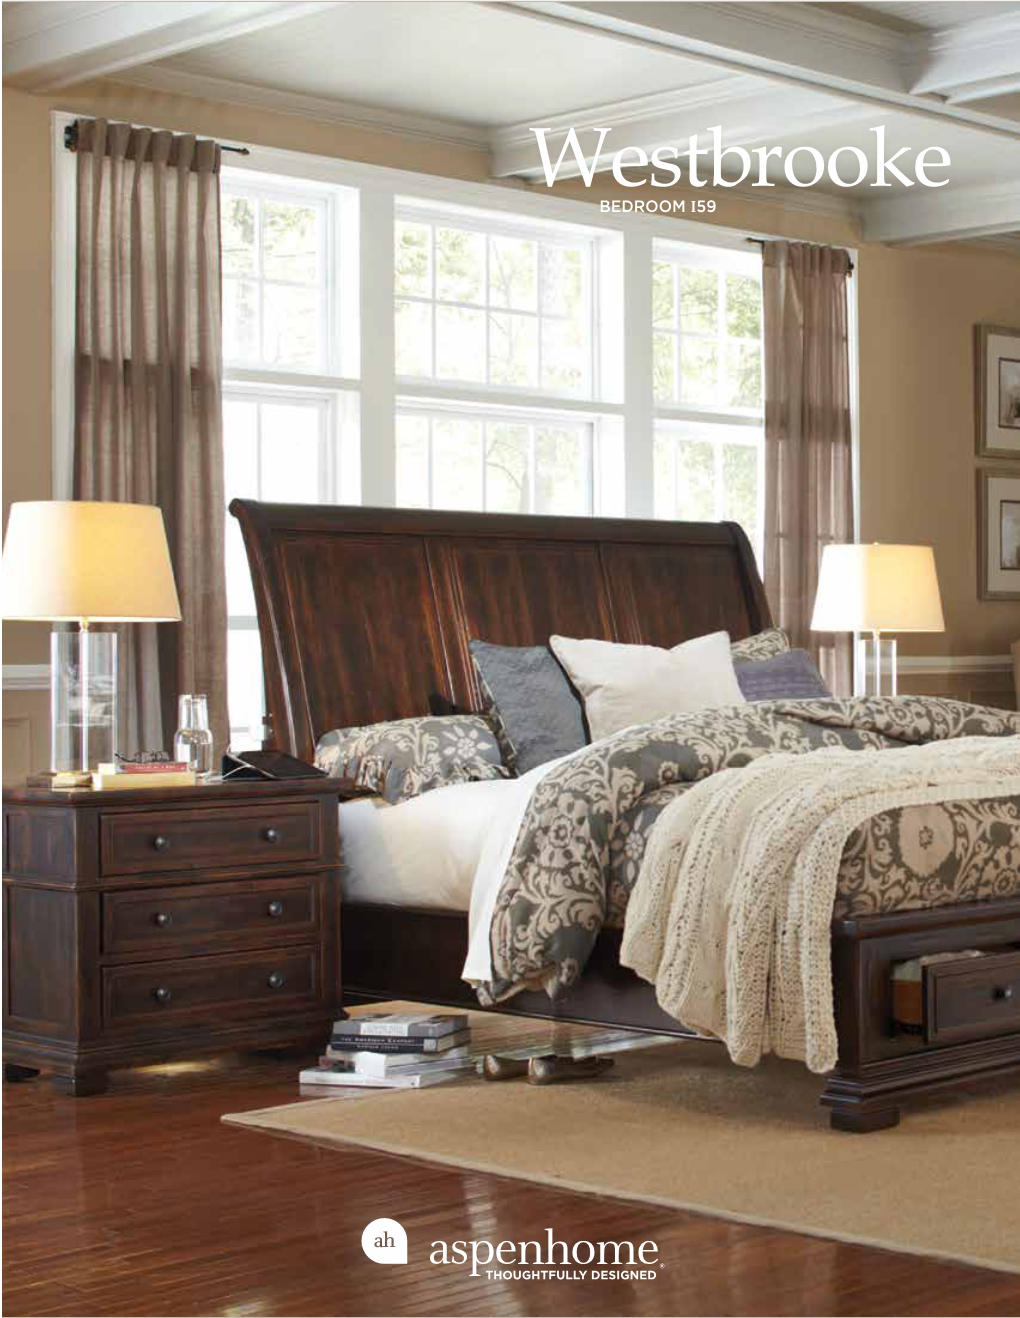 Westbrooke BEDROOM I59 • Cedar-Lined Bottom Drawers for Out-Of-Season Storage